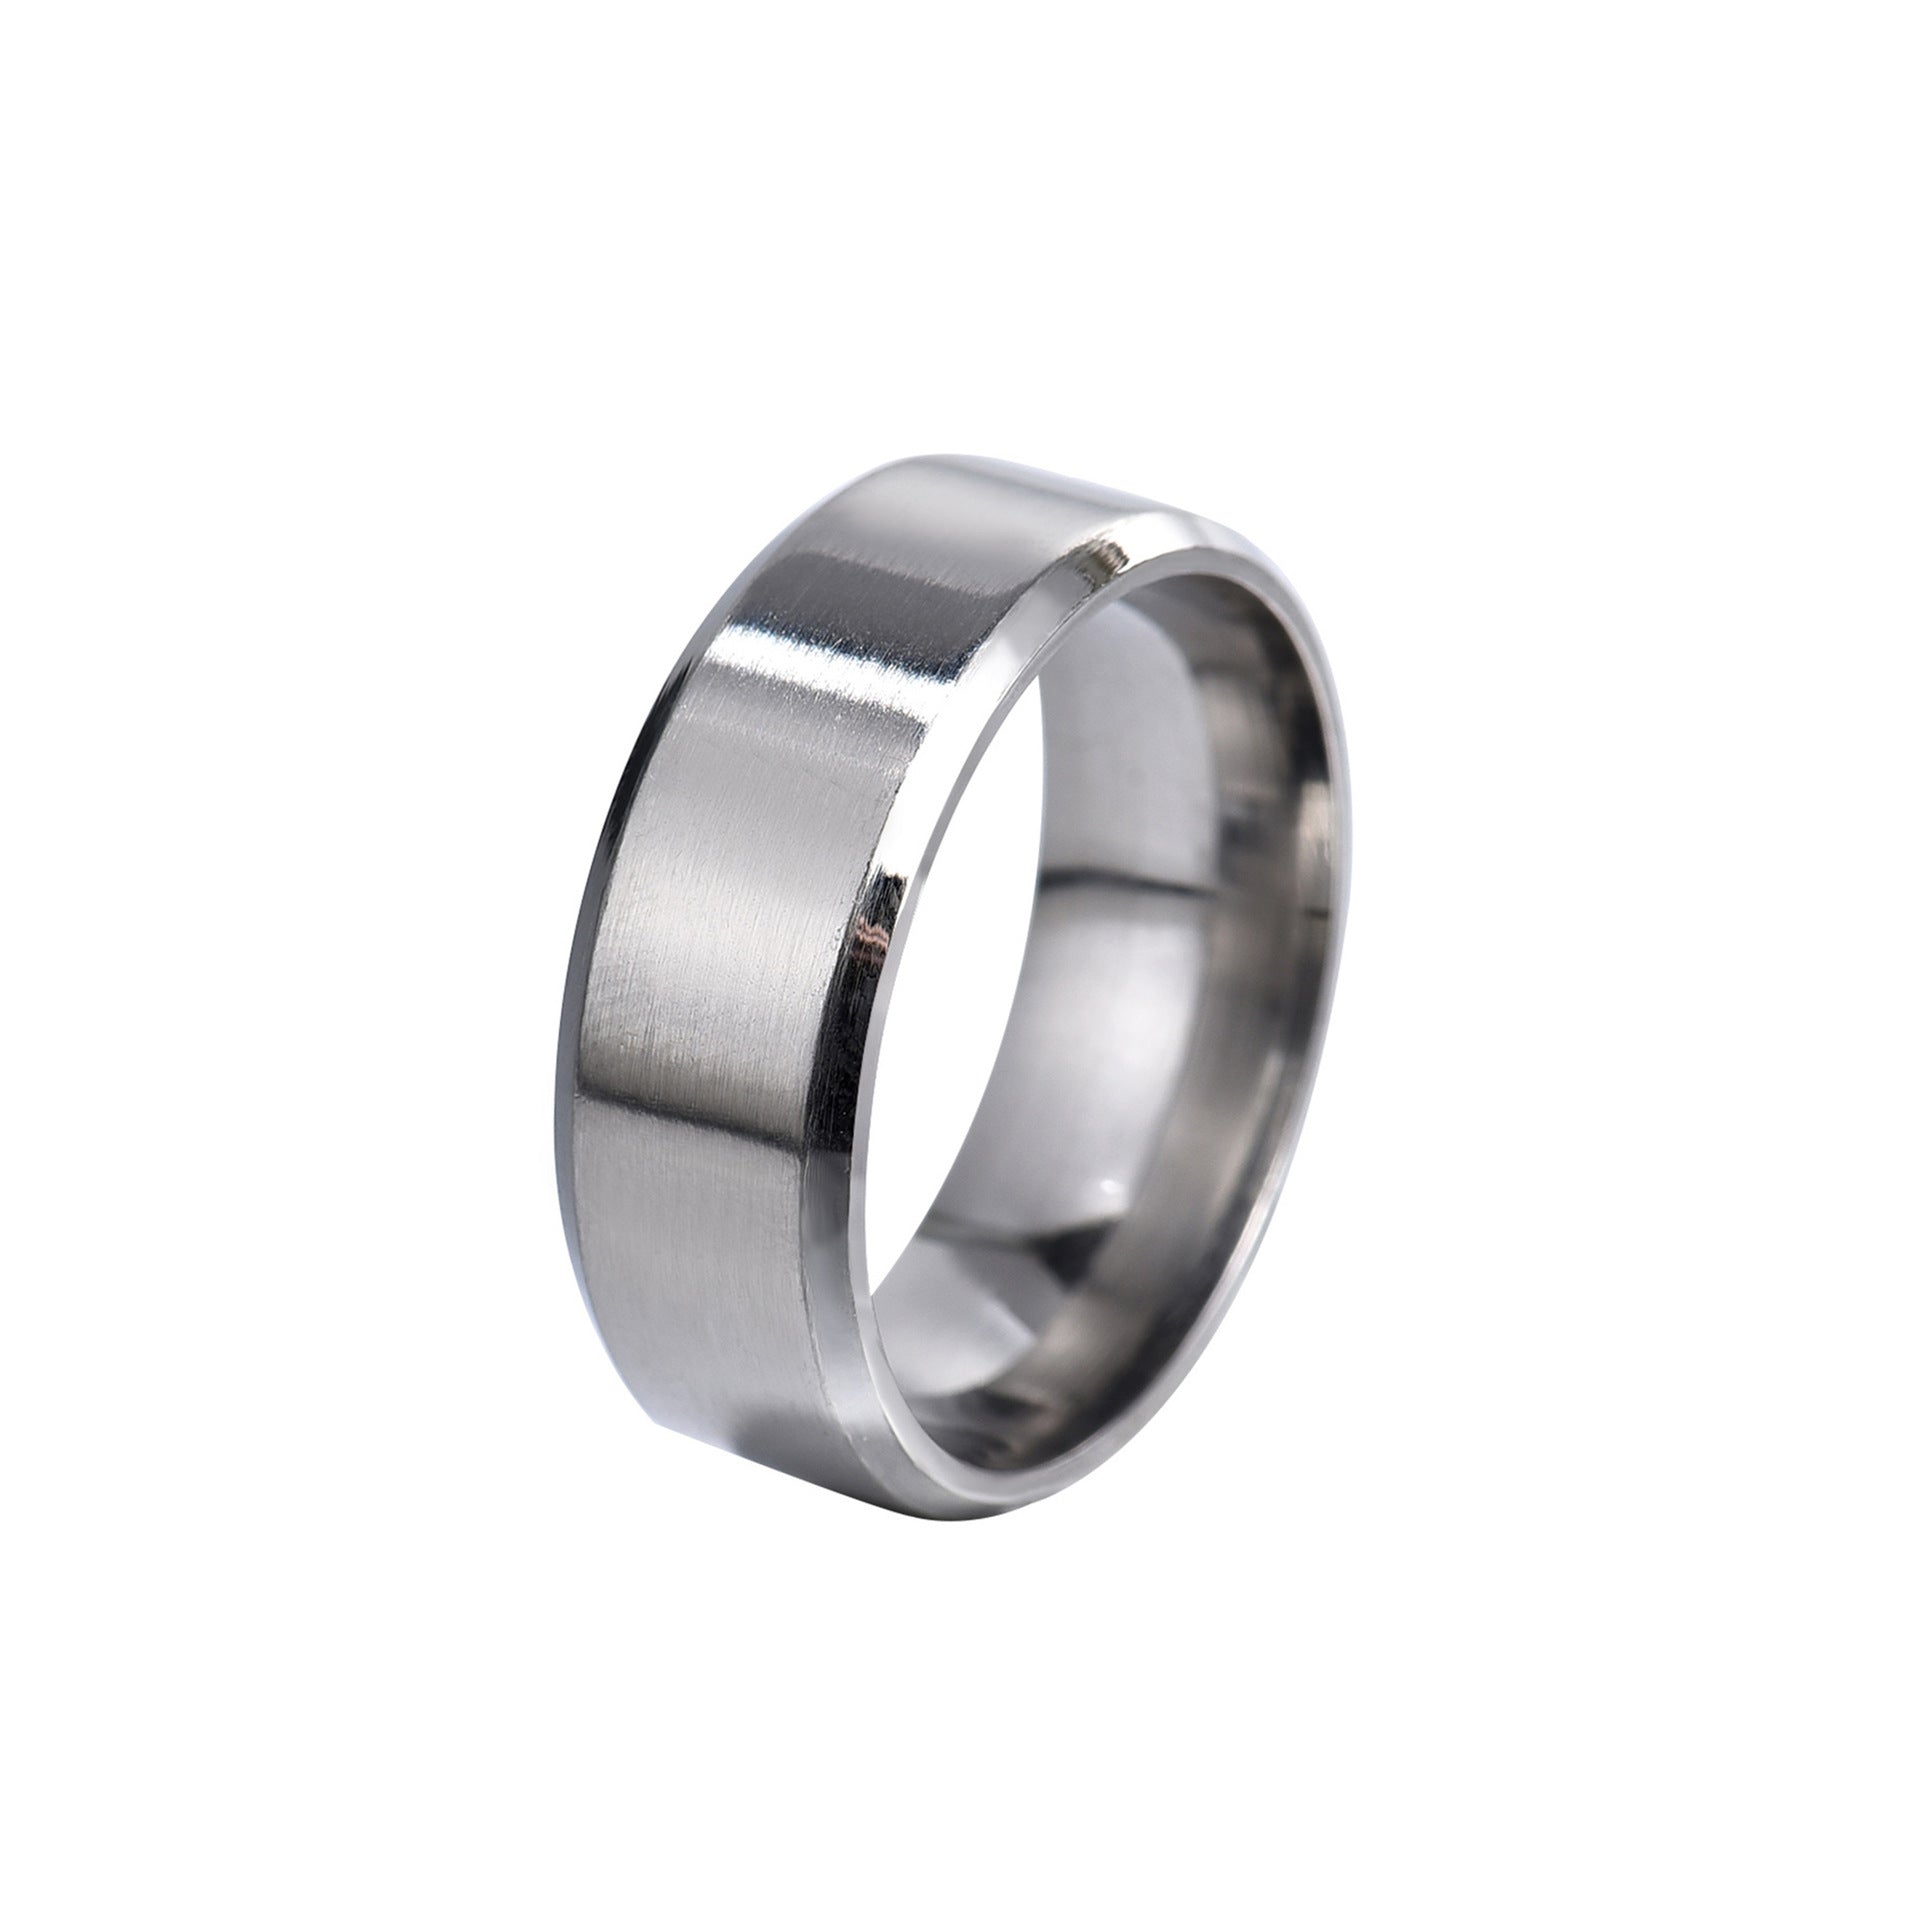 Silver Colored 316L Quality Steel Ring Wedding Ring (30 Size)